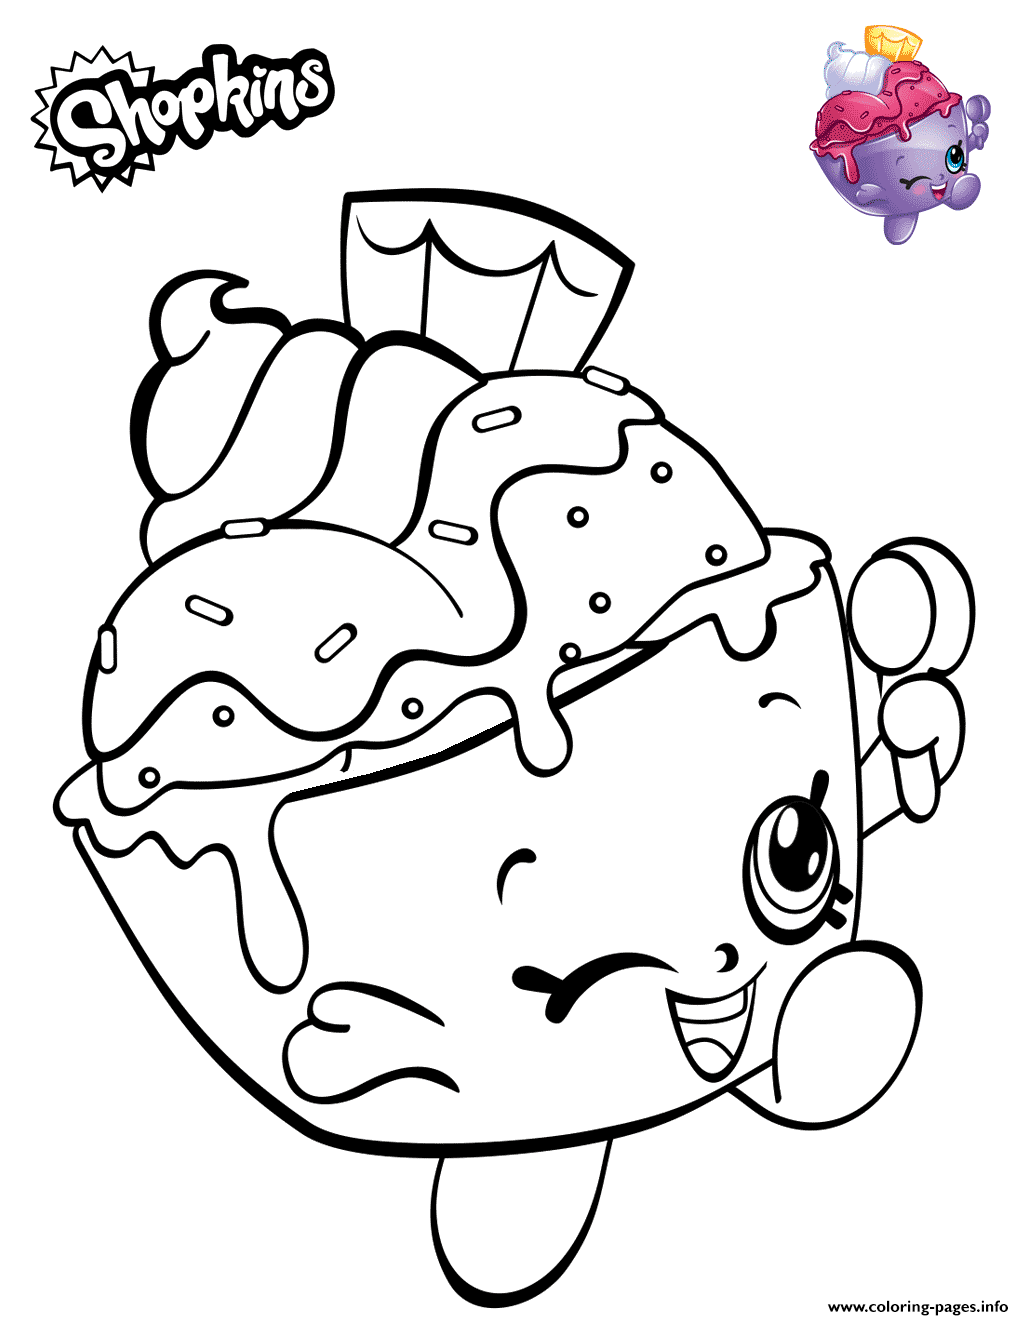 Shopkins Ice Cream Cup Coloring Pages Pr Png Images Pngio Stunning Cute  Printable Man Song – Slavyanka